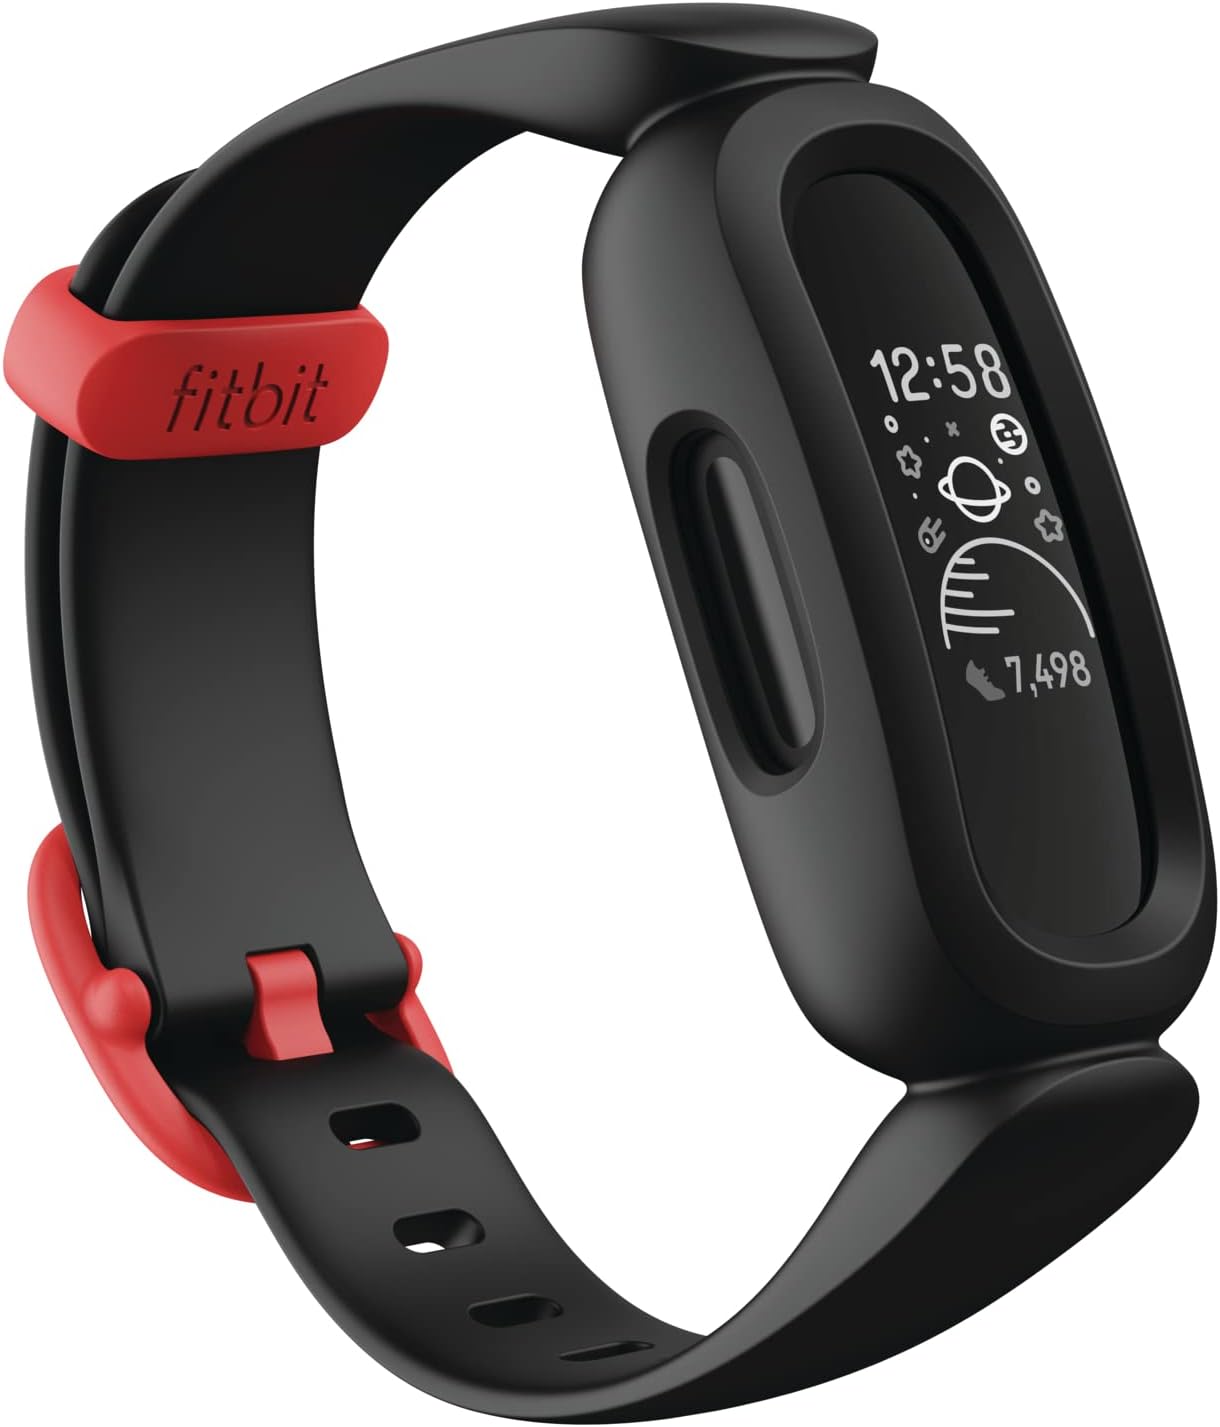 Limited-time deal: Fitbit Ace 3 Activity-Tracker for Kids 6+ One Size, Black/Racer Red - $39.95 at Amazon